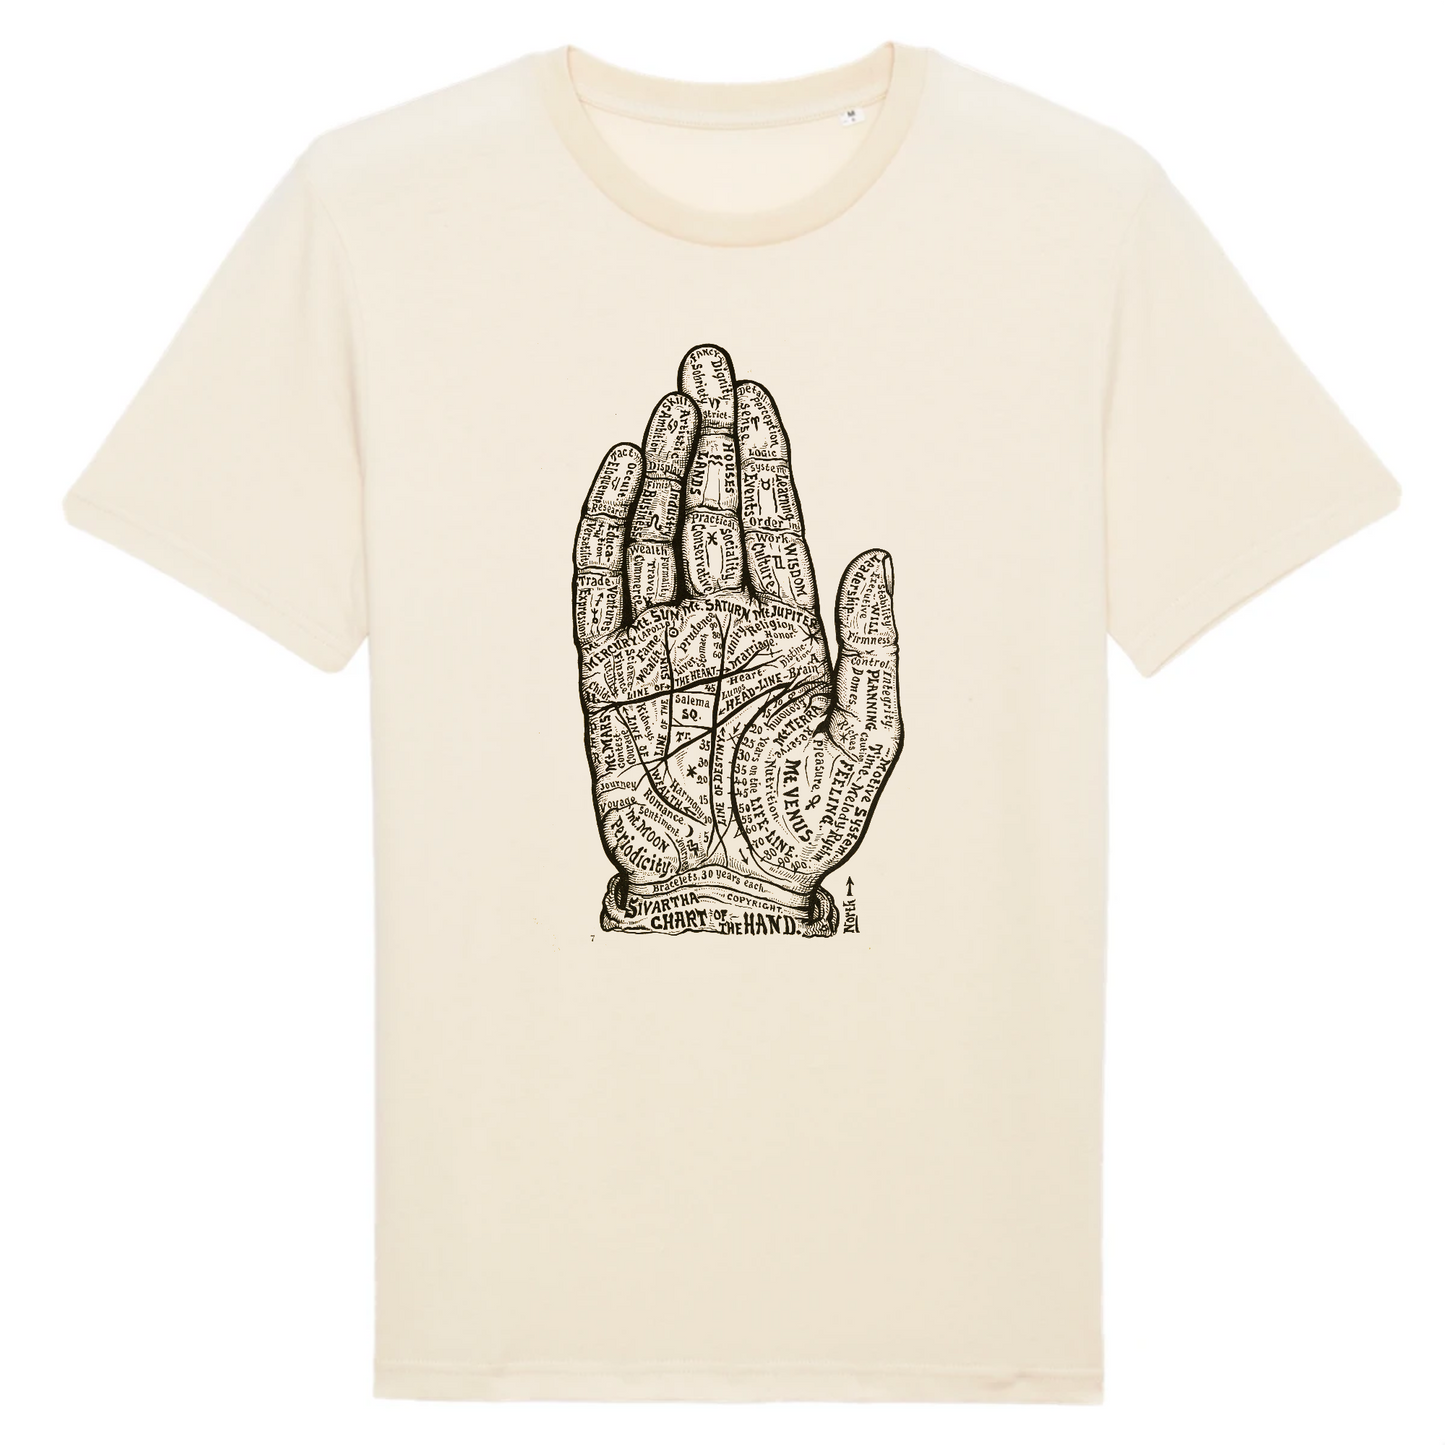 Chart of the Hand from Dr Alesha Sivarth's Book of Life, 1898 - Organic Cotton T-Shirt